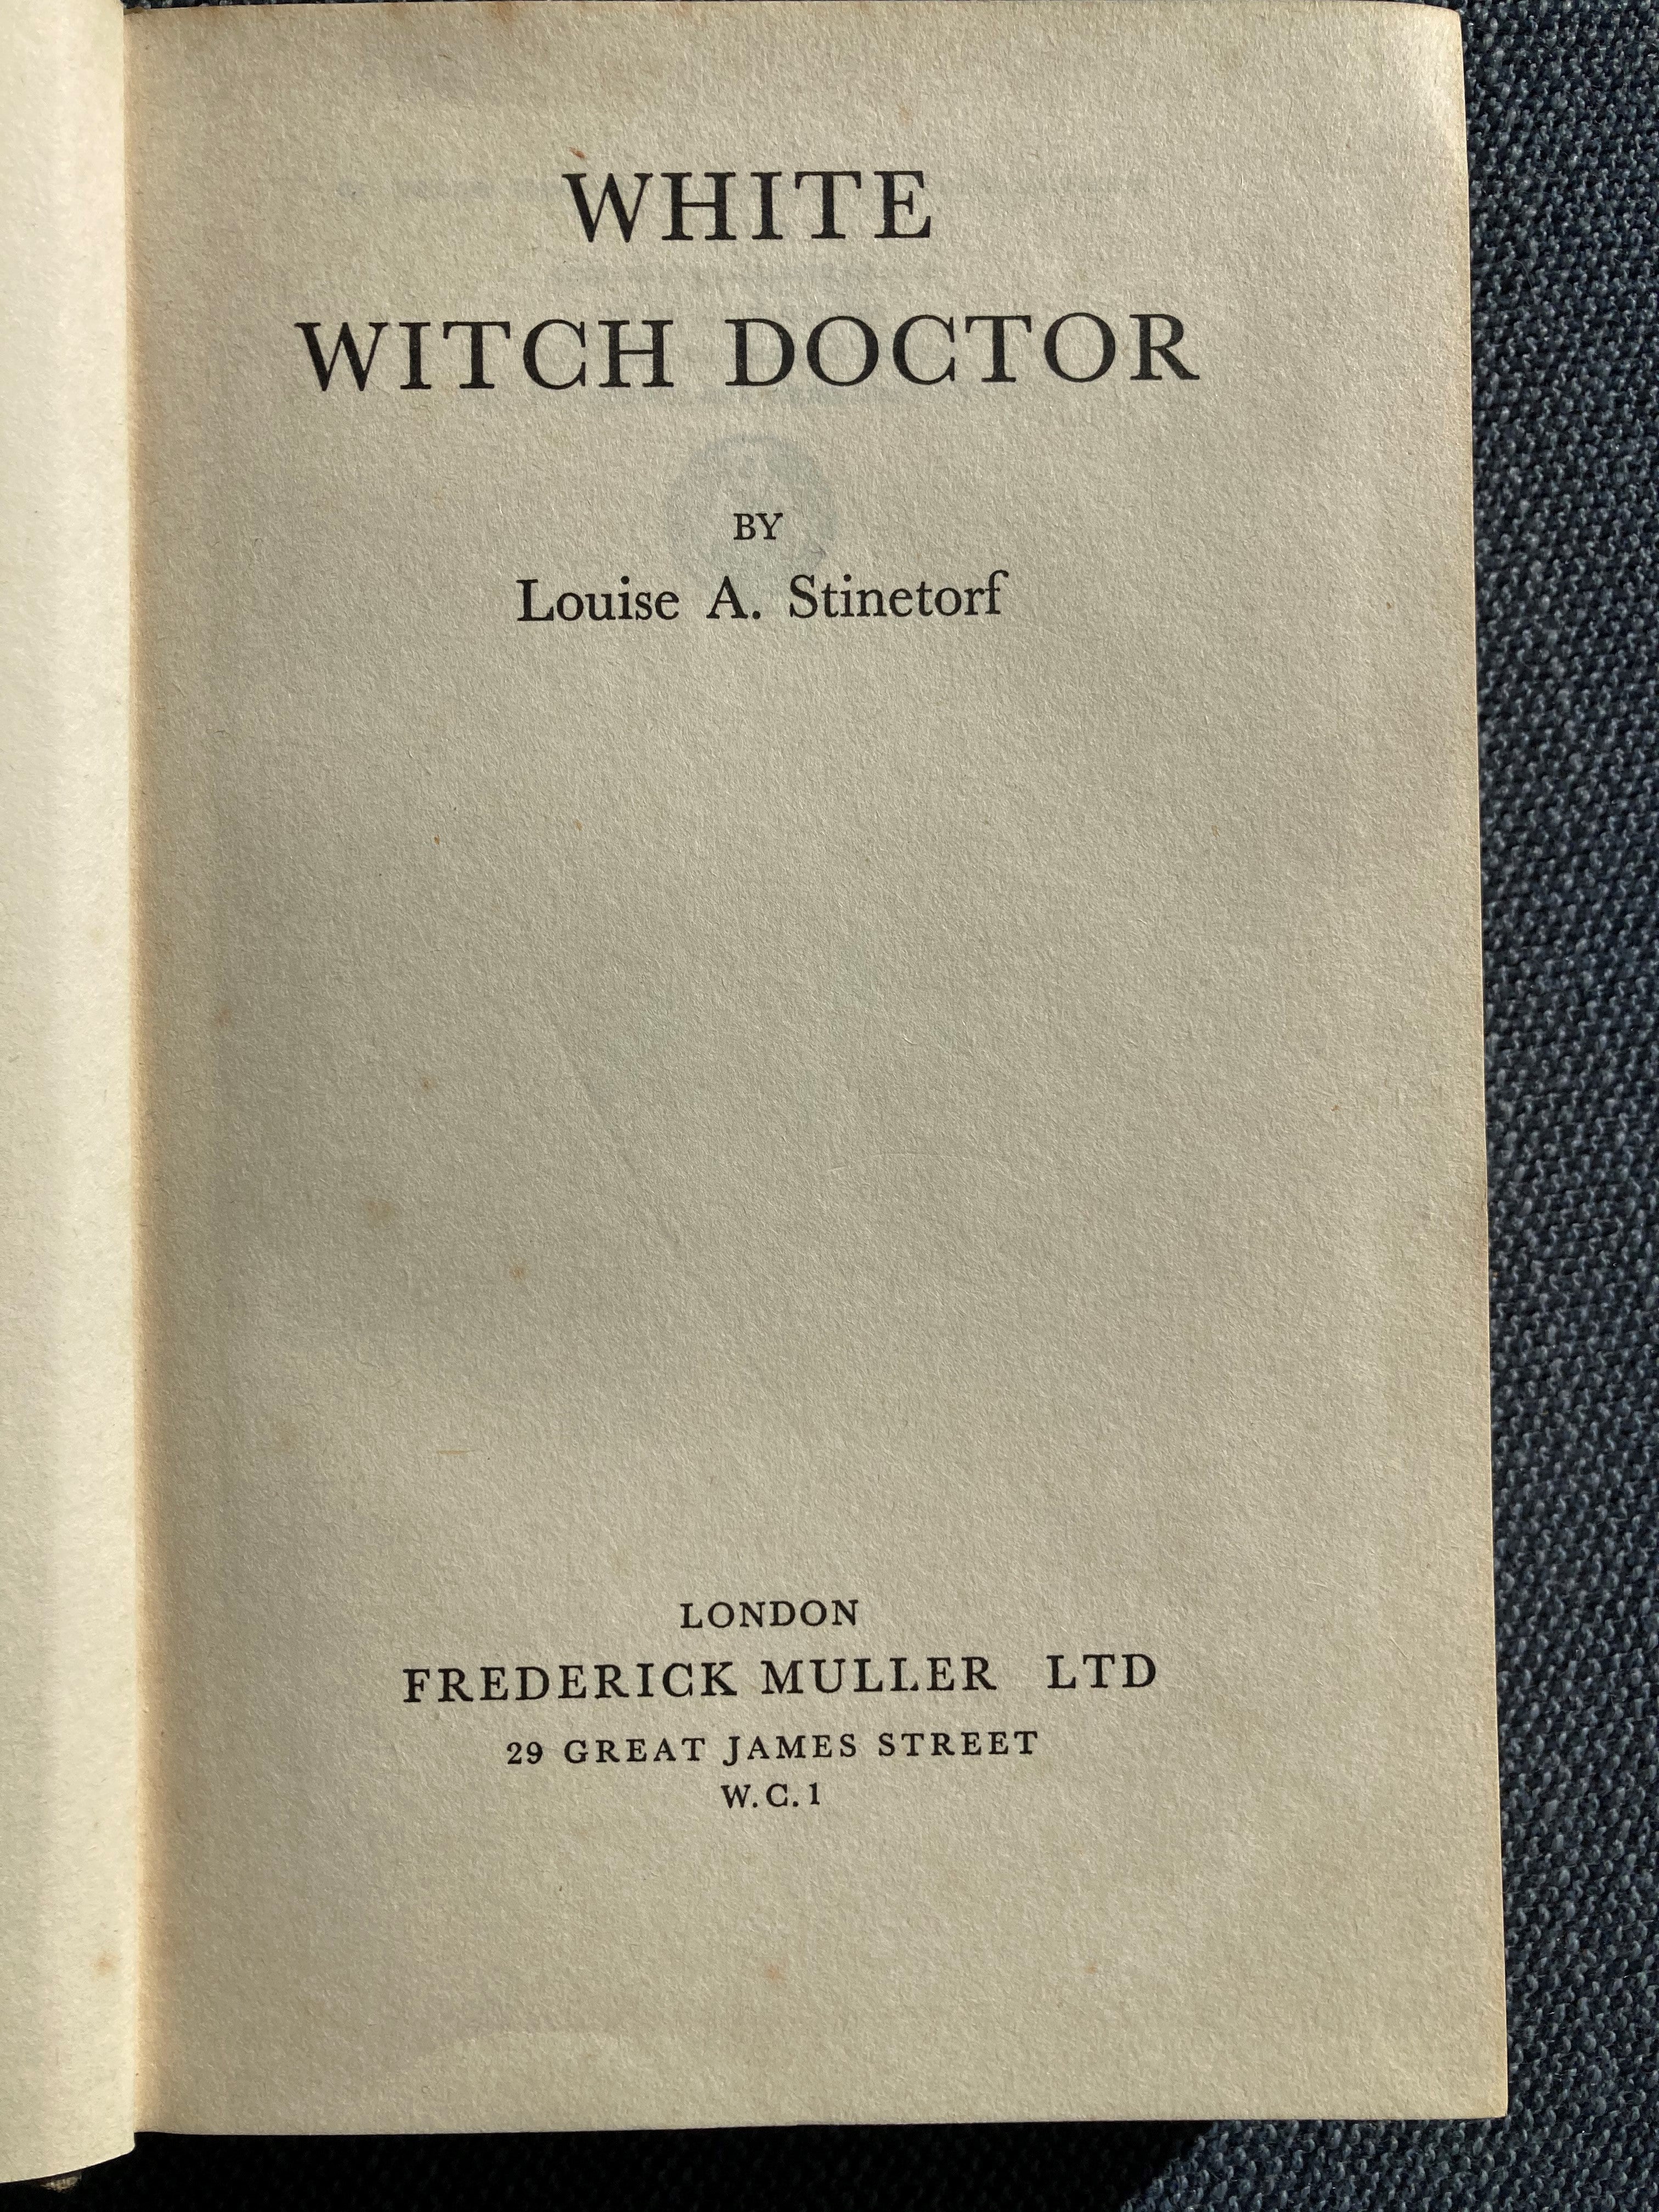 White Witch Doctor, by Louise A. Stinetorf